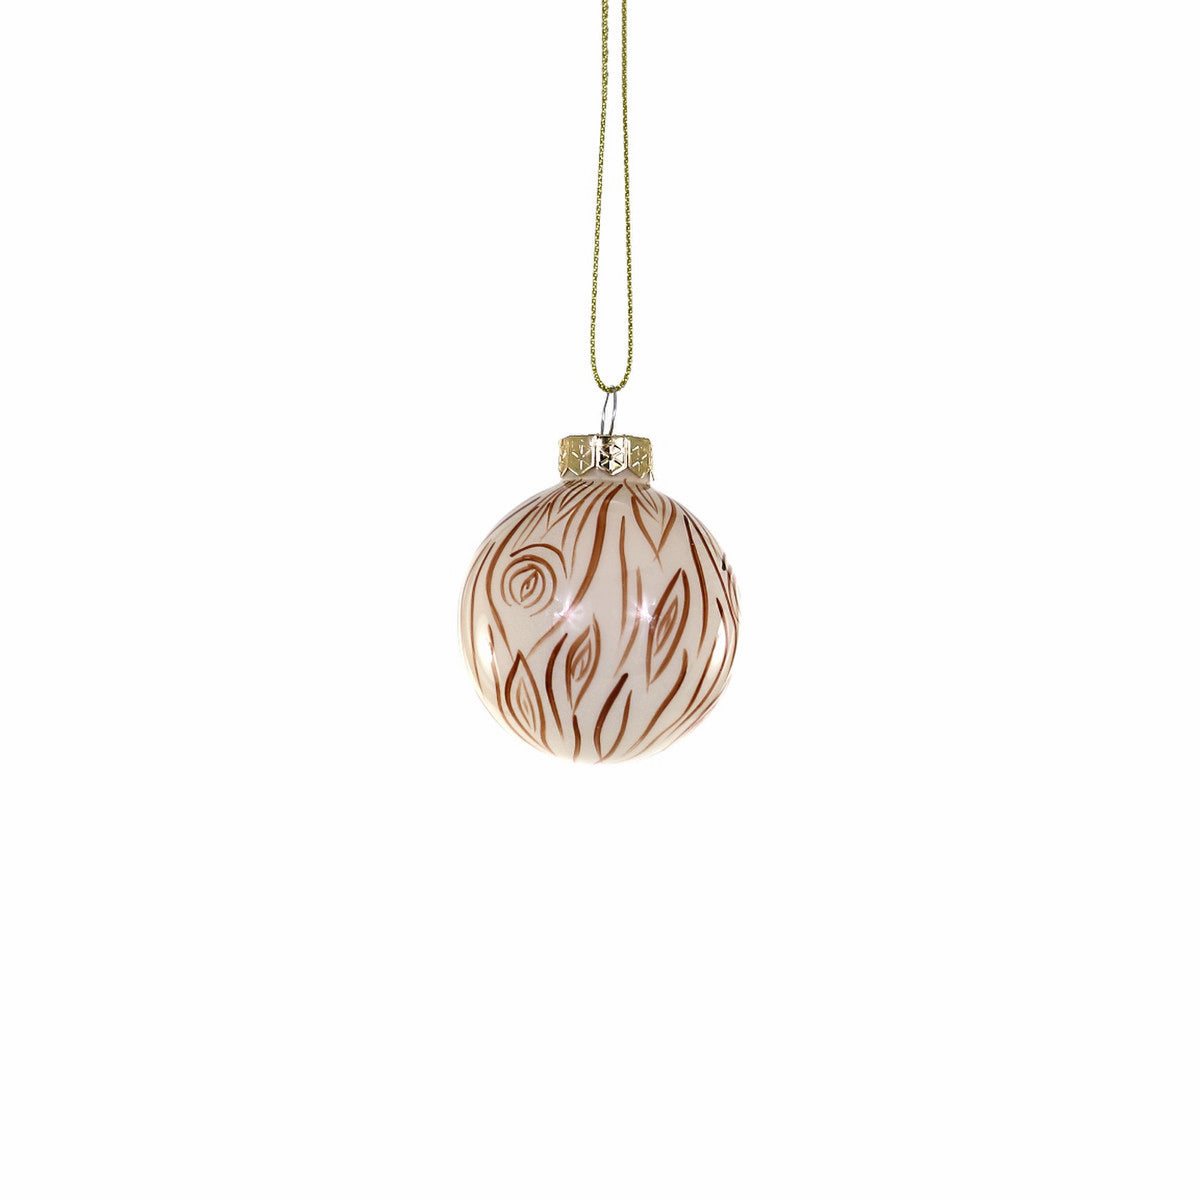 Small Glass Faux Bois Bauble Christmas Ornament